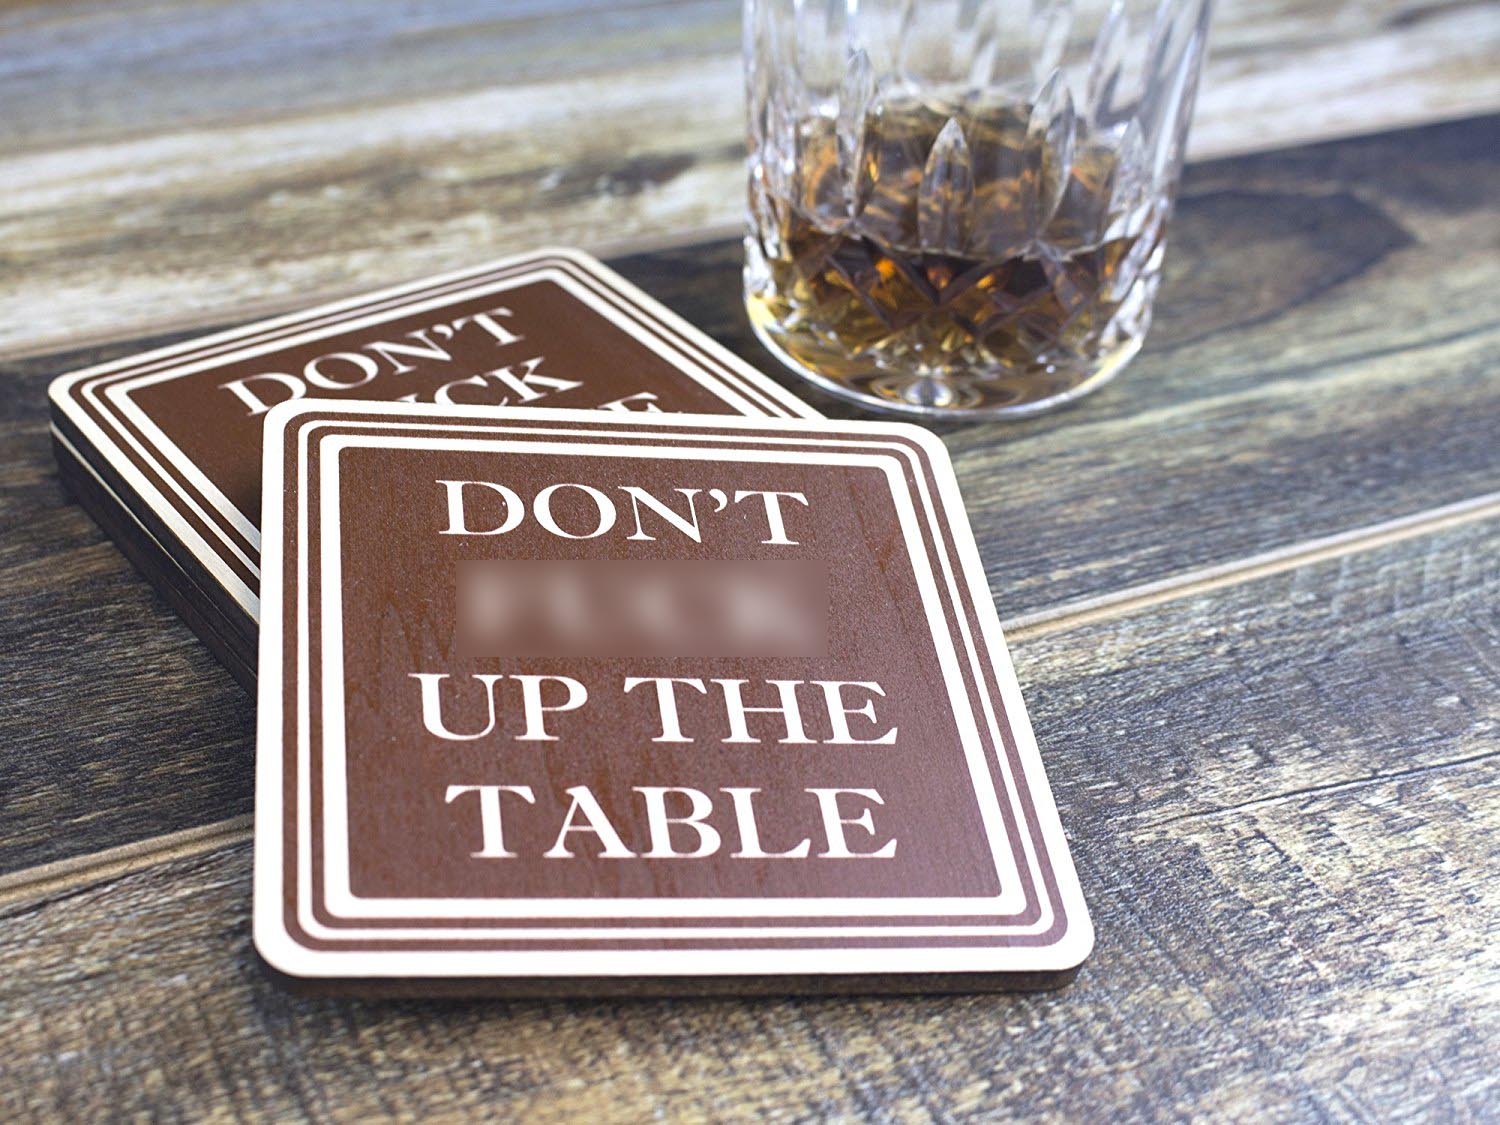 A coaster that says "DON'T F**K UP THE TABLE" is probably the exact message you want to send to your houseguests.</br></br>Get one <a href=https://amzn.to/2LMOhBJ "nofollow" target="_blank">here.</a>